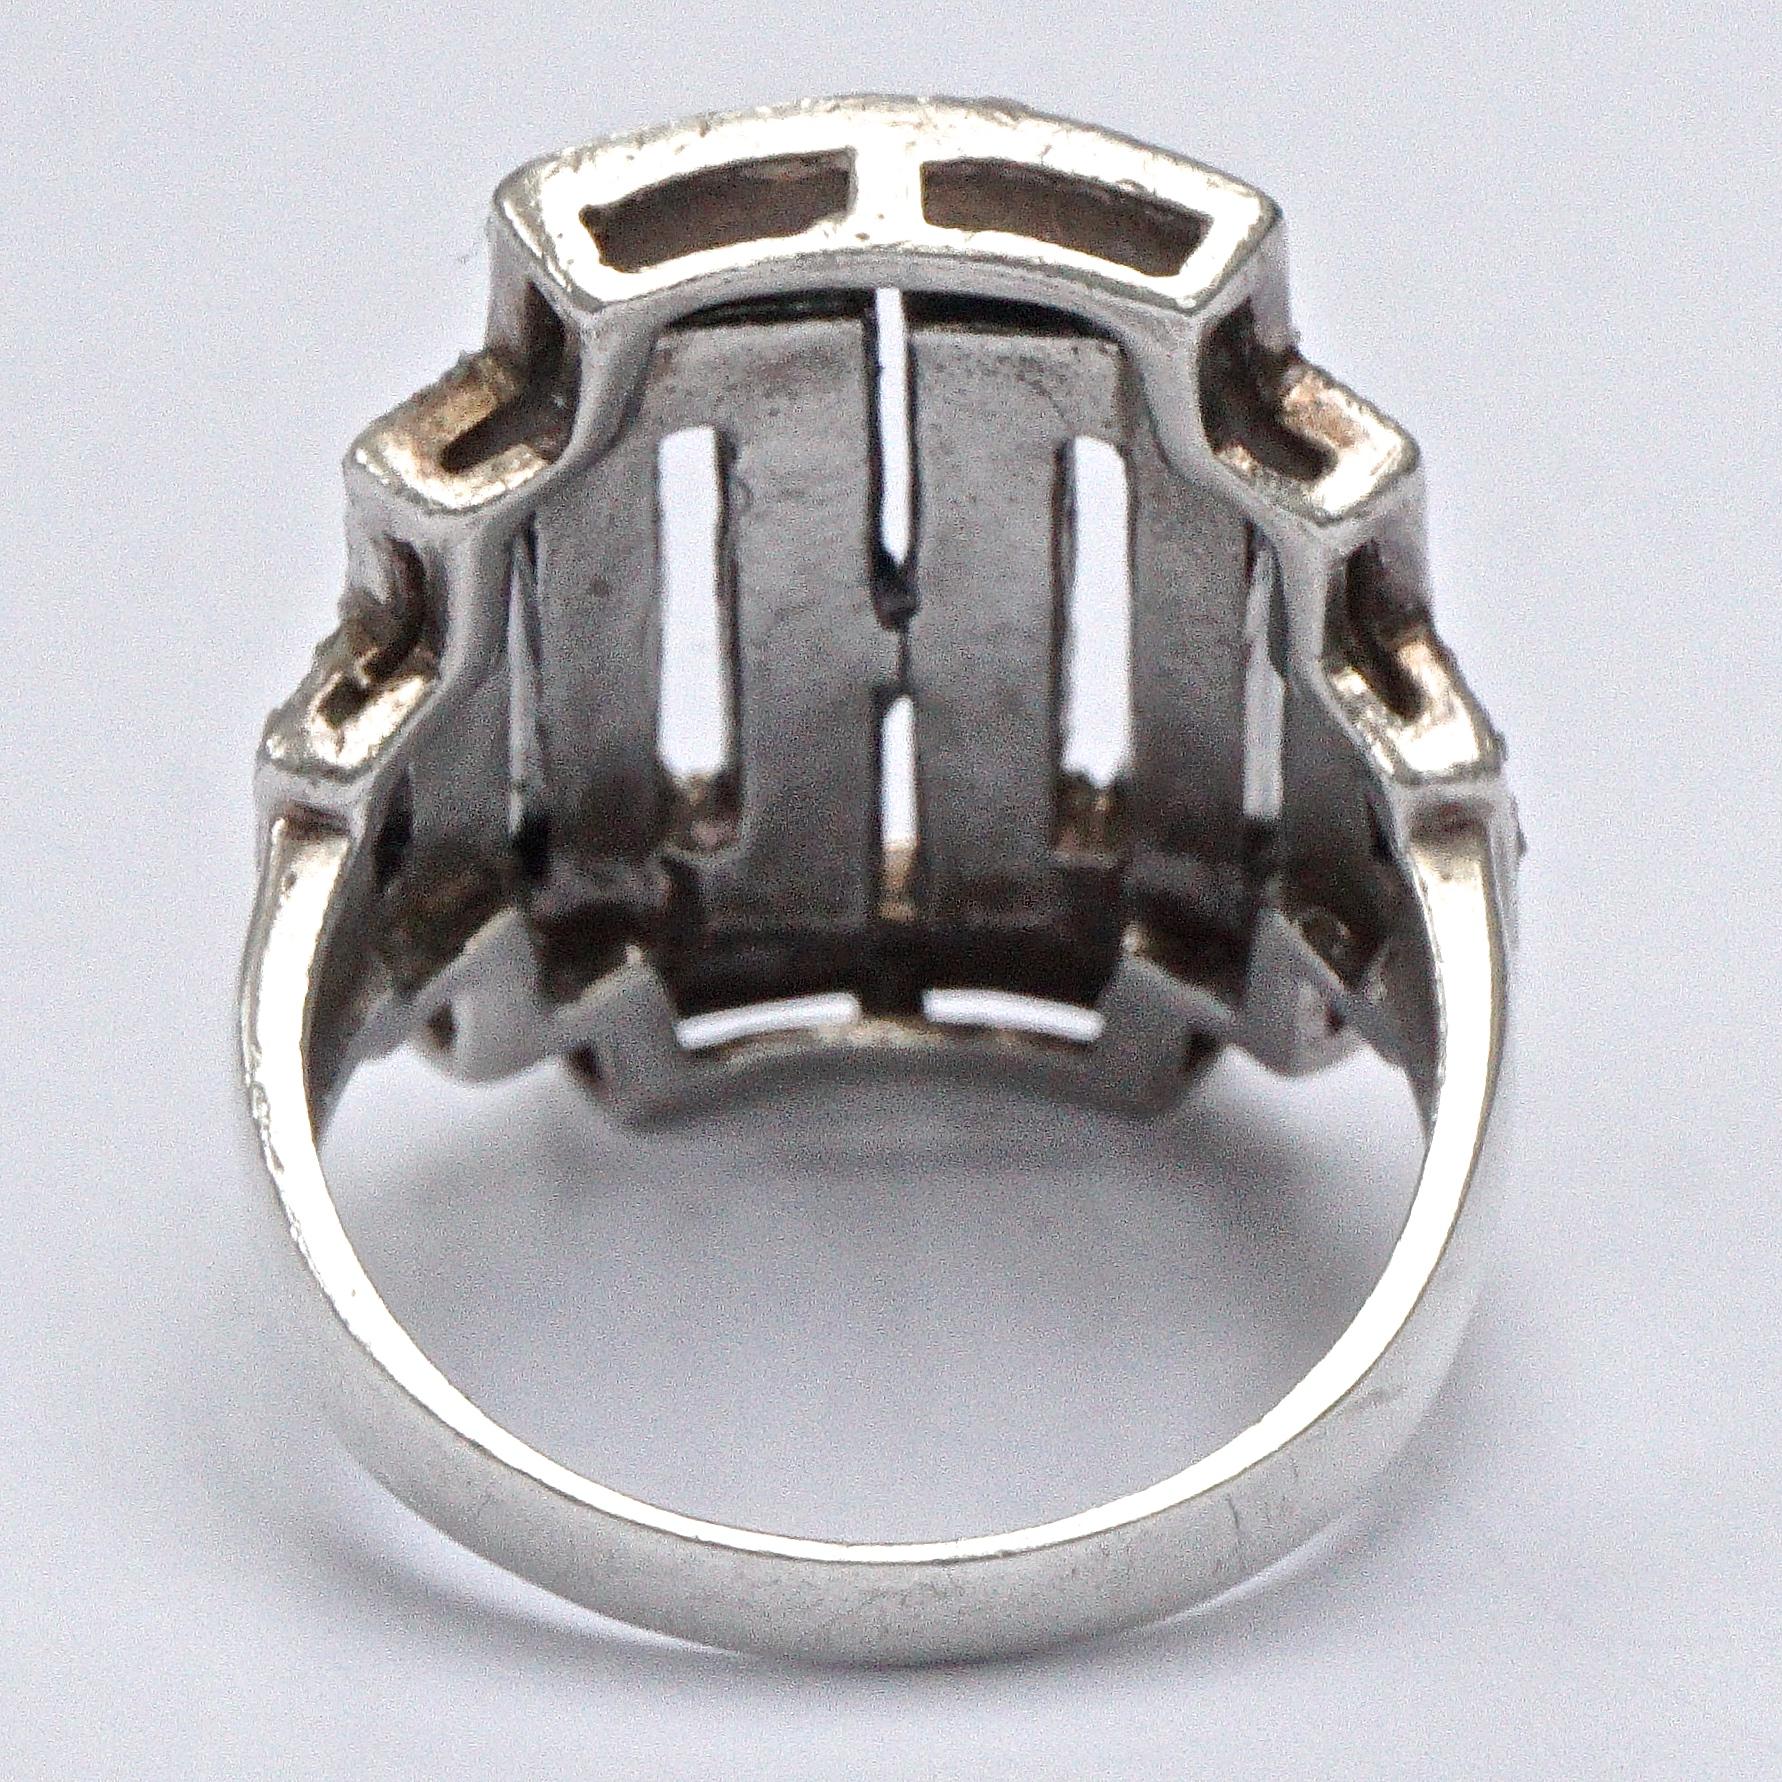 Art Deco sterling silver rectangular ring set with faceted marcasites, and decorated with millgrain edging decoration. Ring size UK O / US 7, inside diameter 1.8cm, and the front is length 2.3cm / .9 inch. There is wear as expected, and some of the